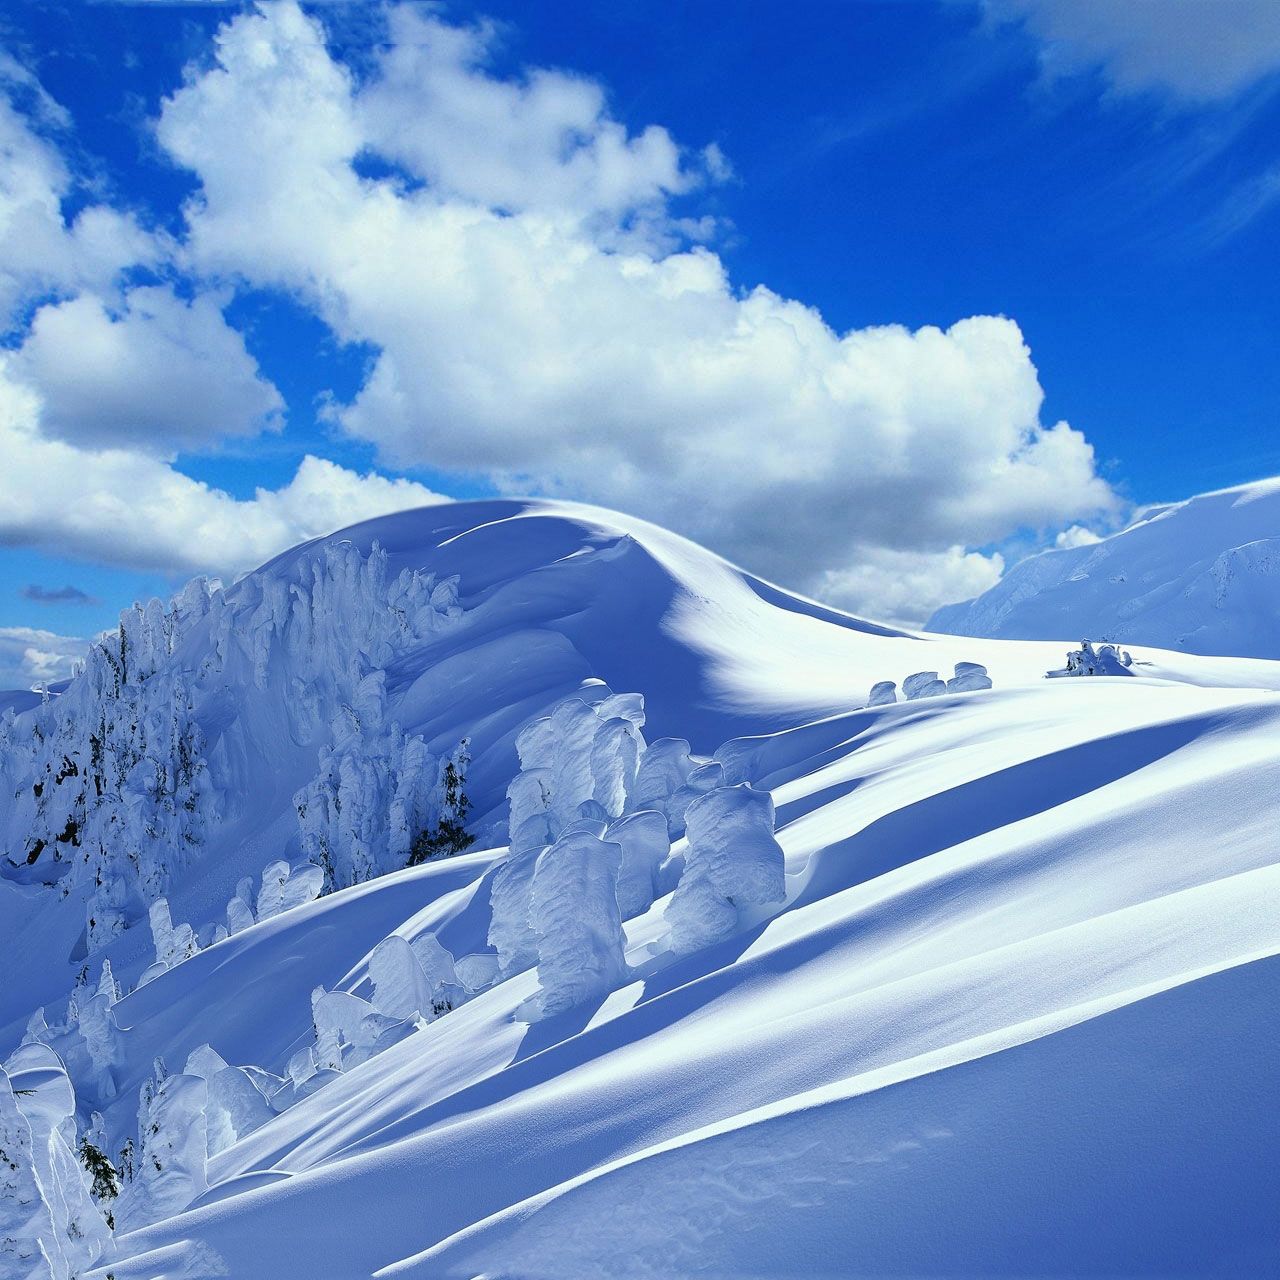 Snowy Mountains Samsung Galaxy Tab 10 wallpapers | Tablet ...